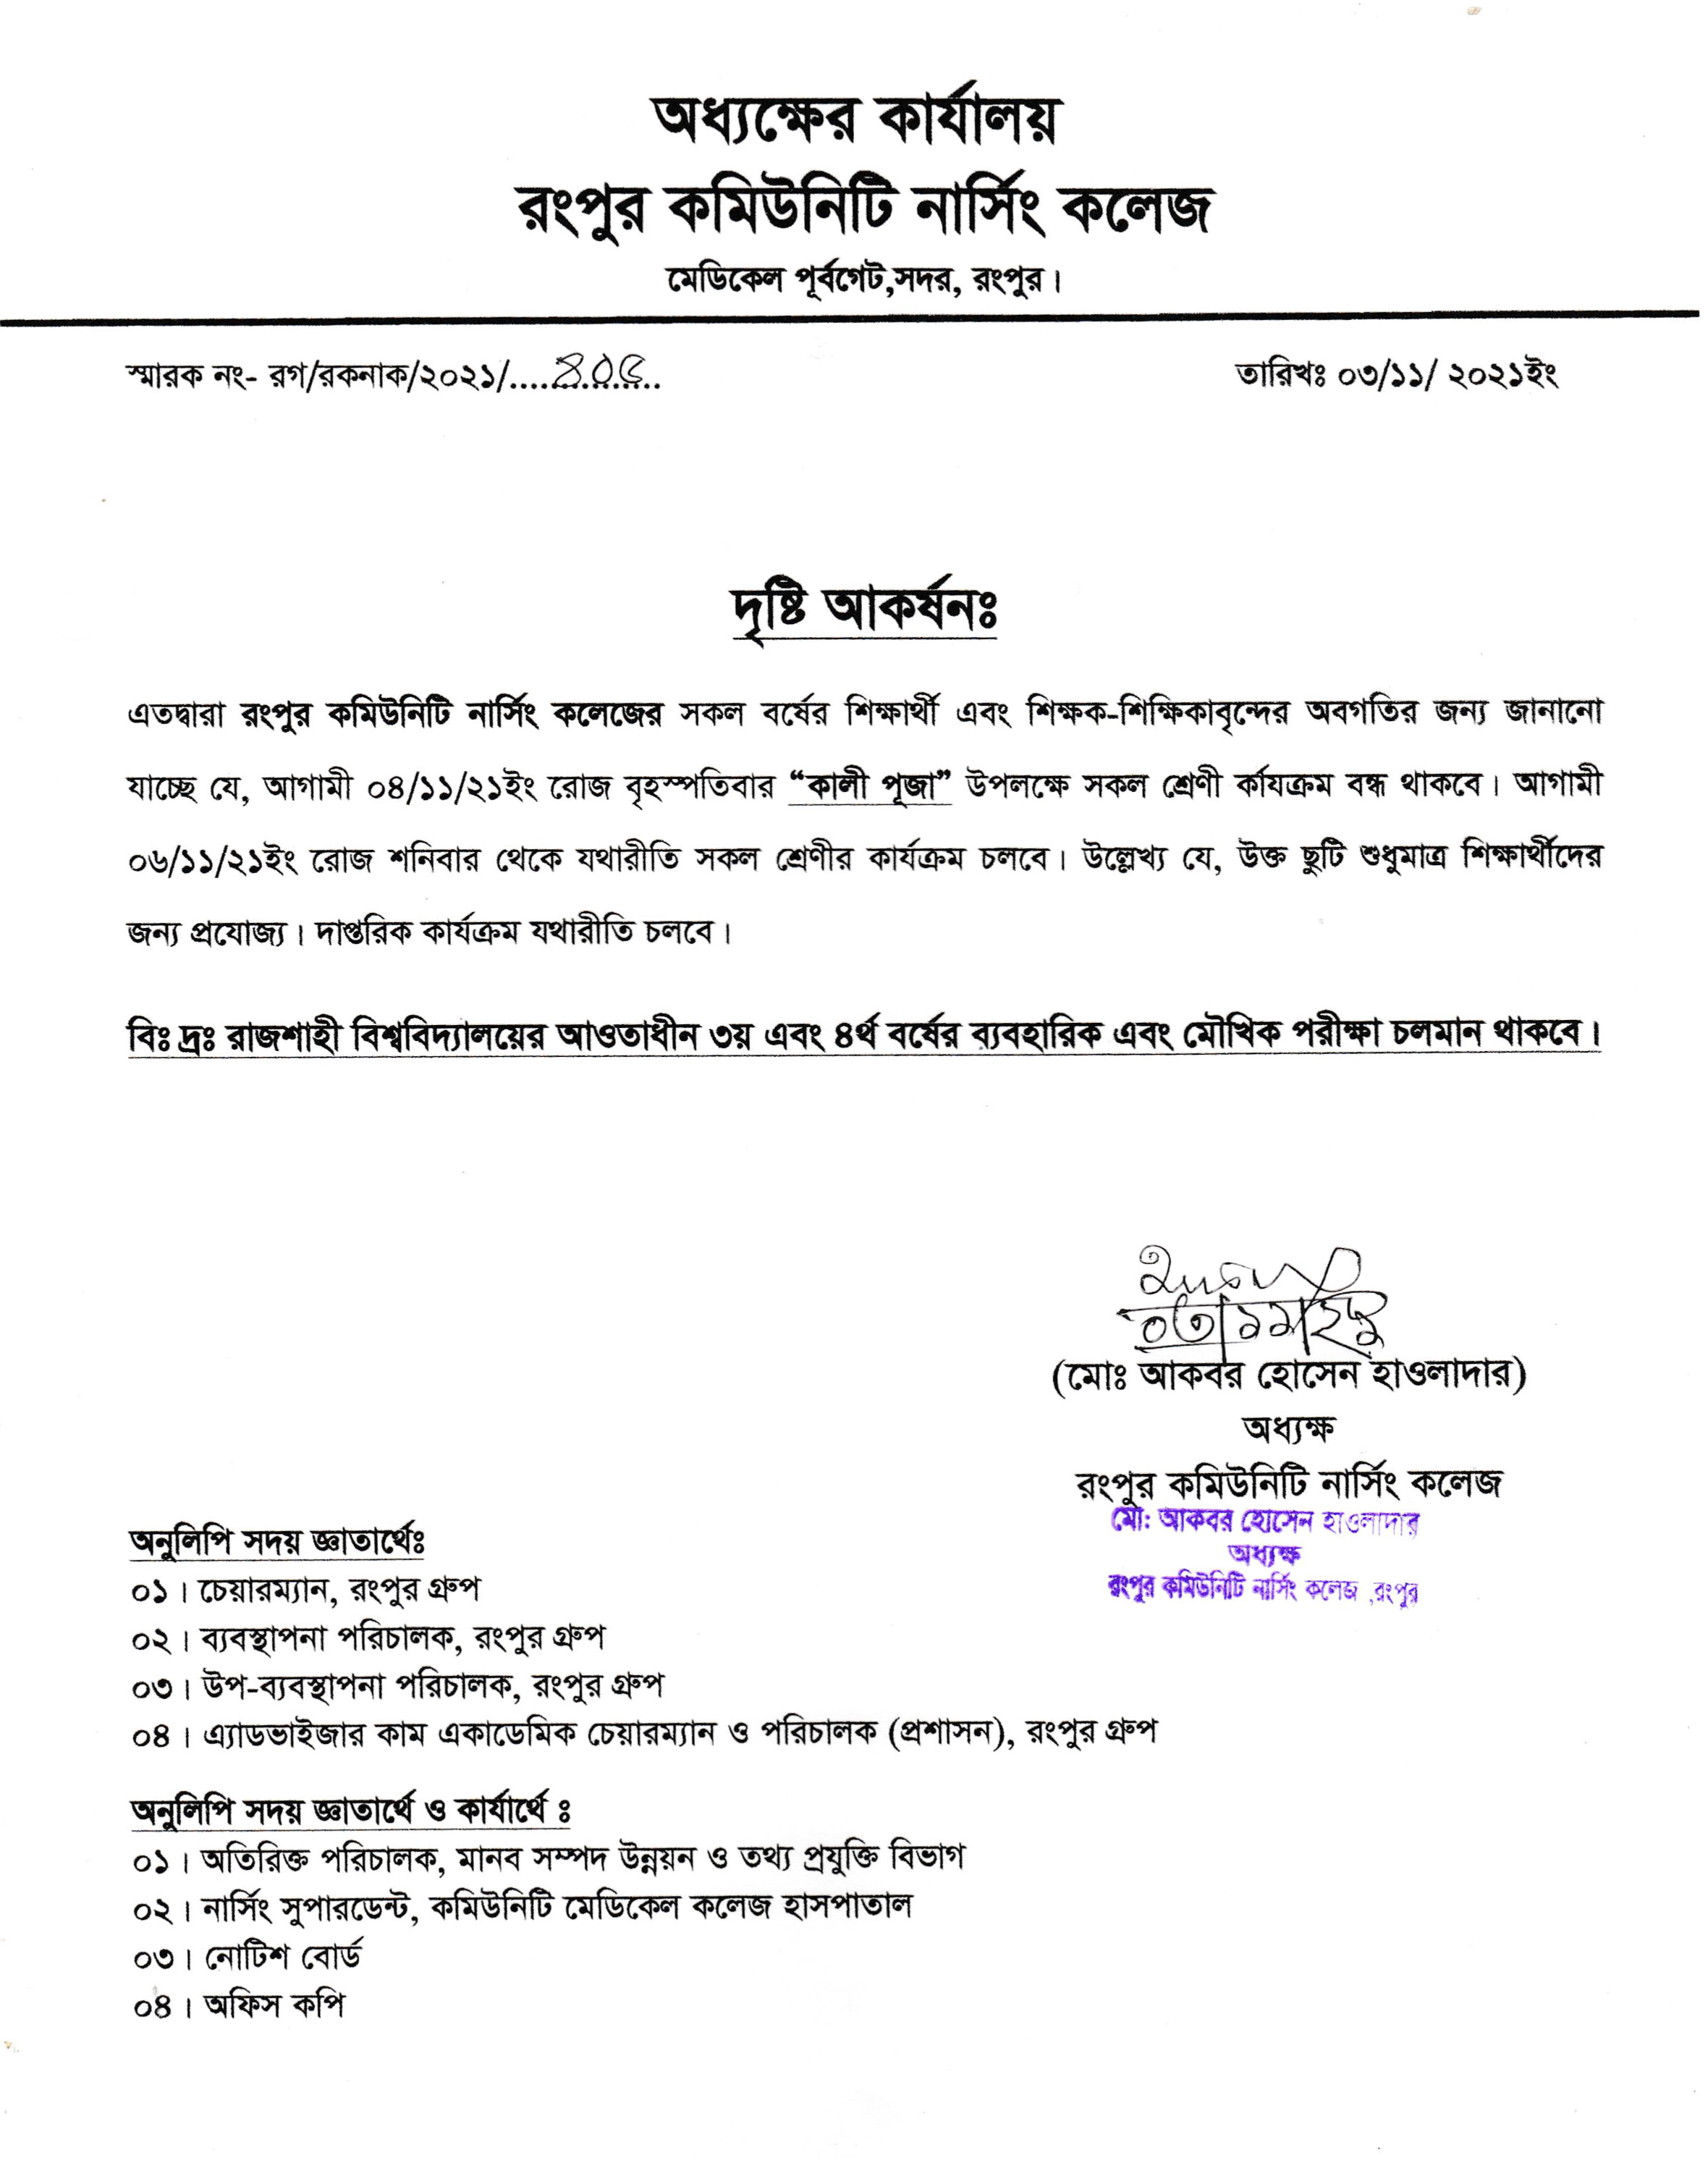 Holiday Notice of Kali Puja by RCNC, 2021